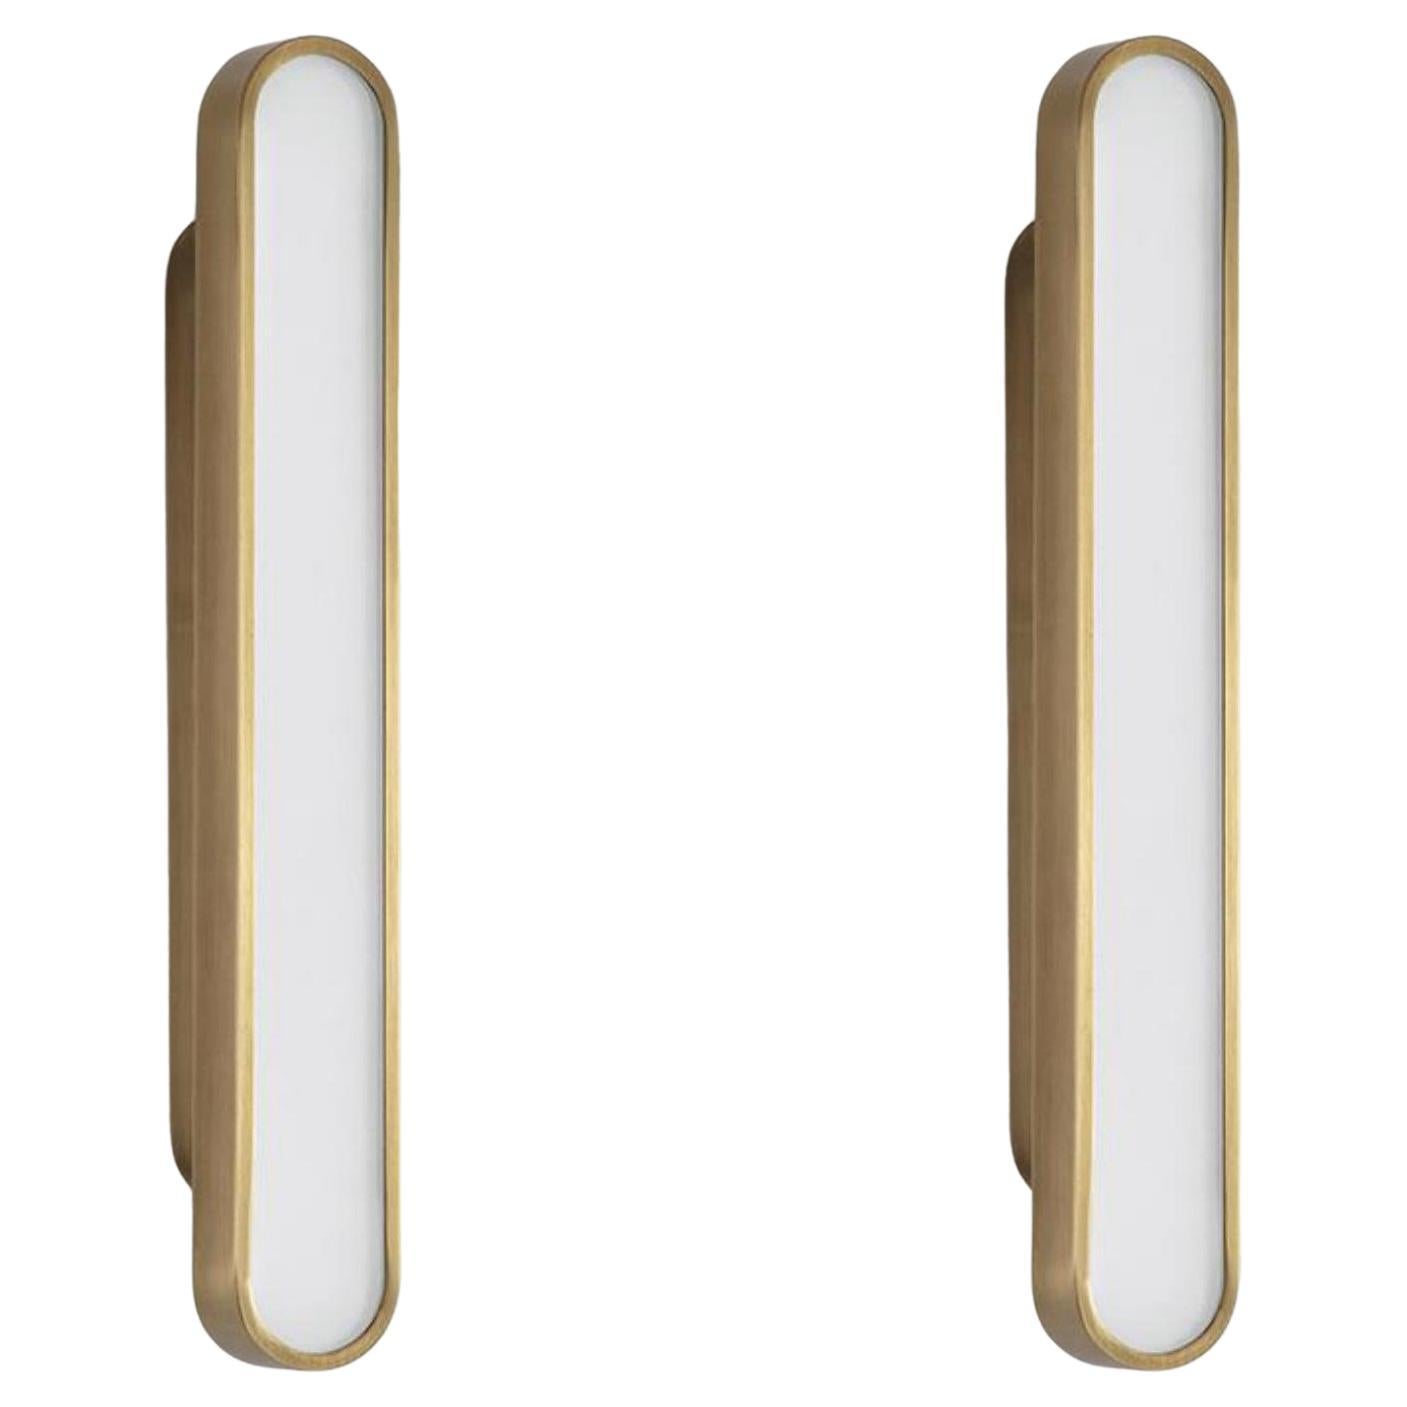 Set of 2 Capsule Golden Wall Lights by Square in Circle